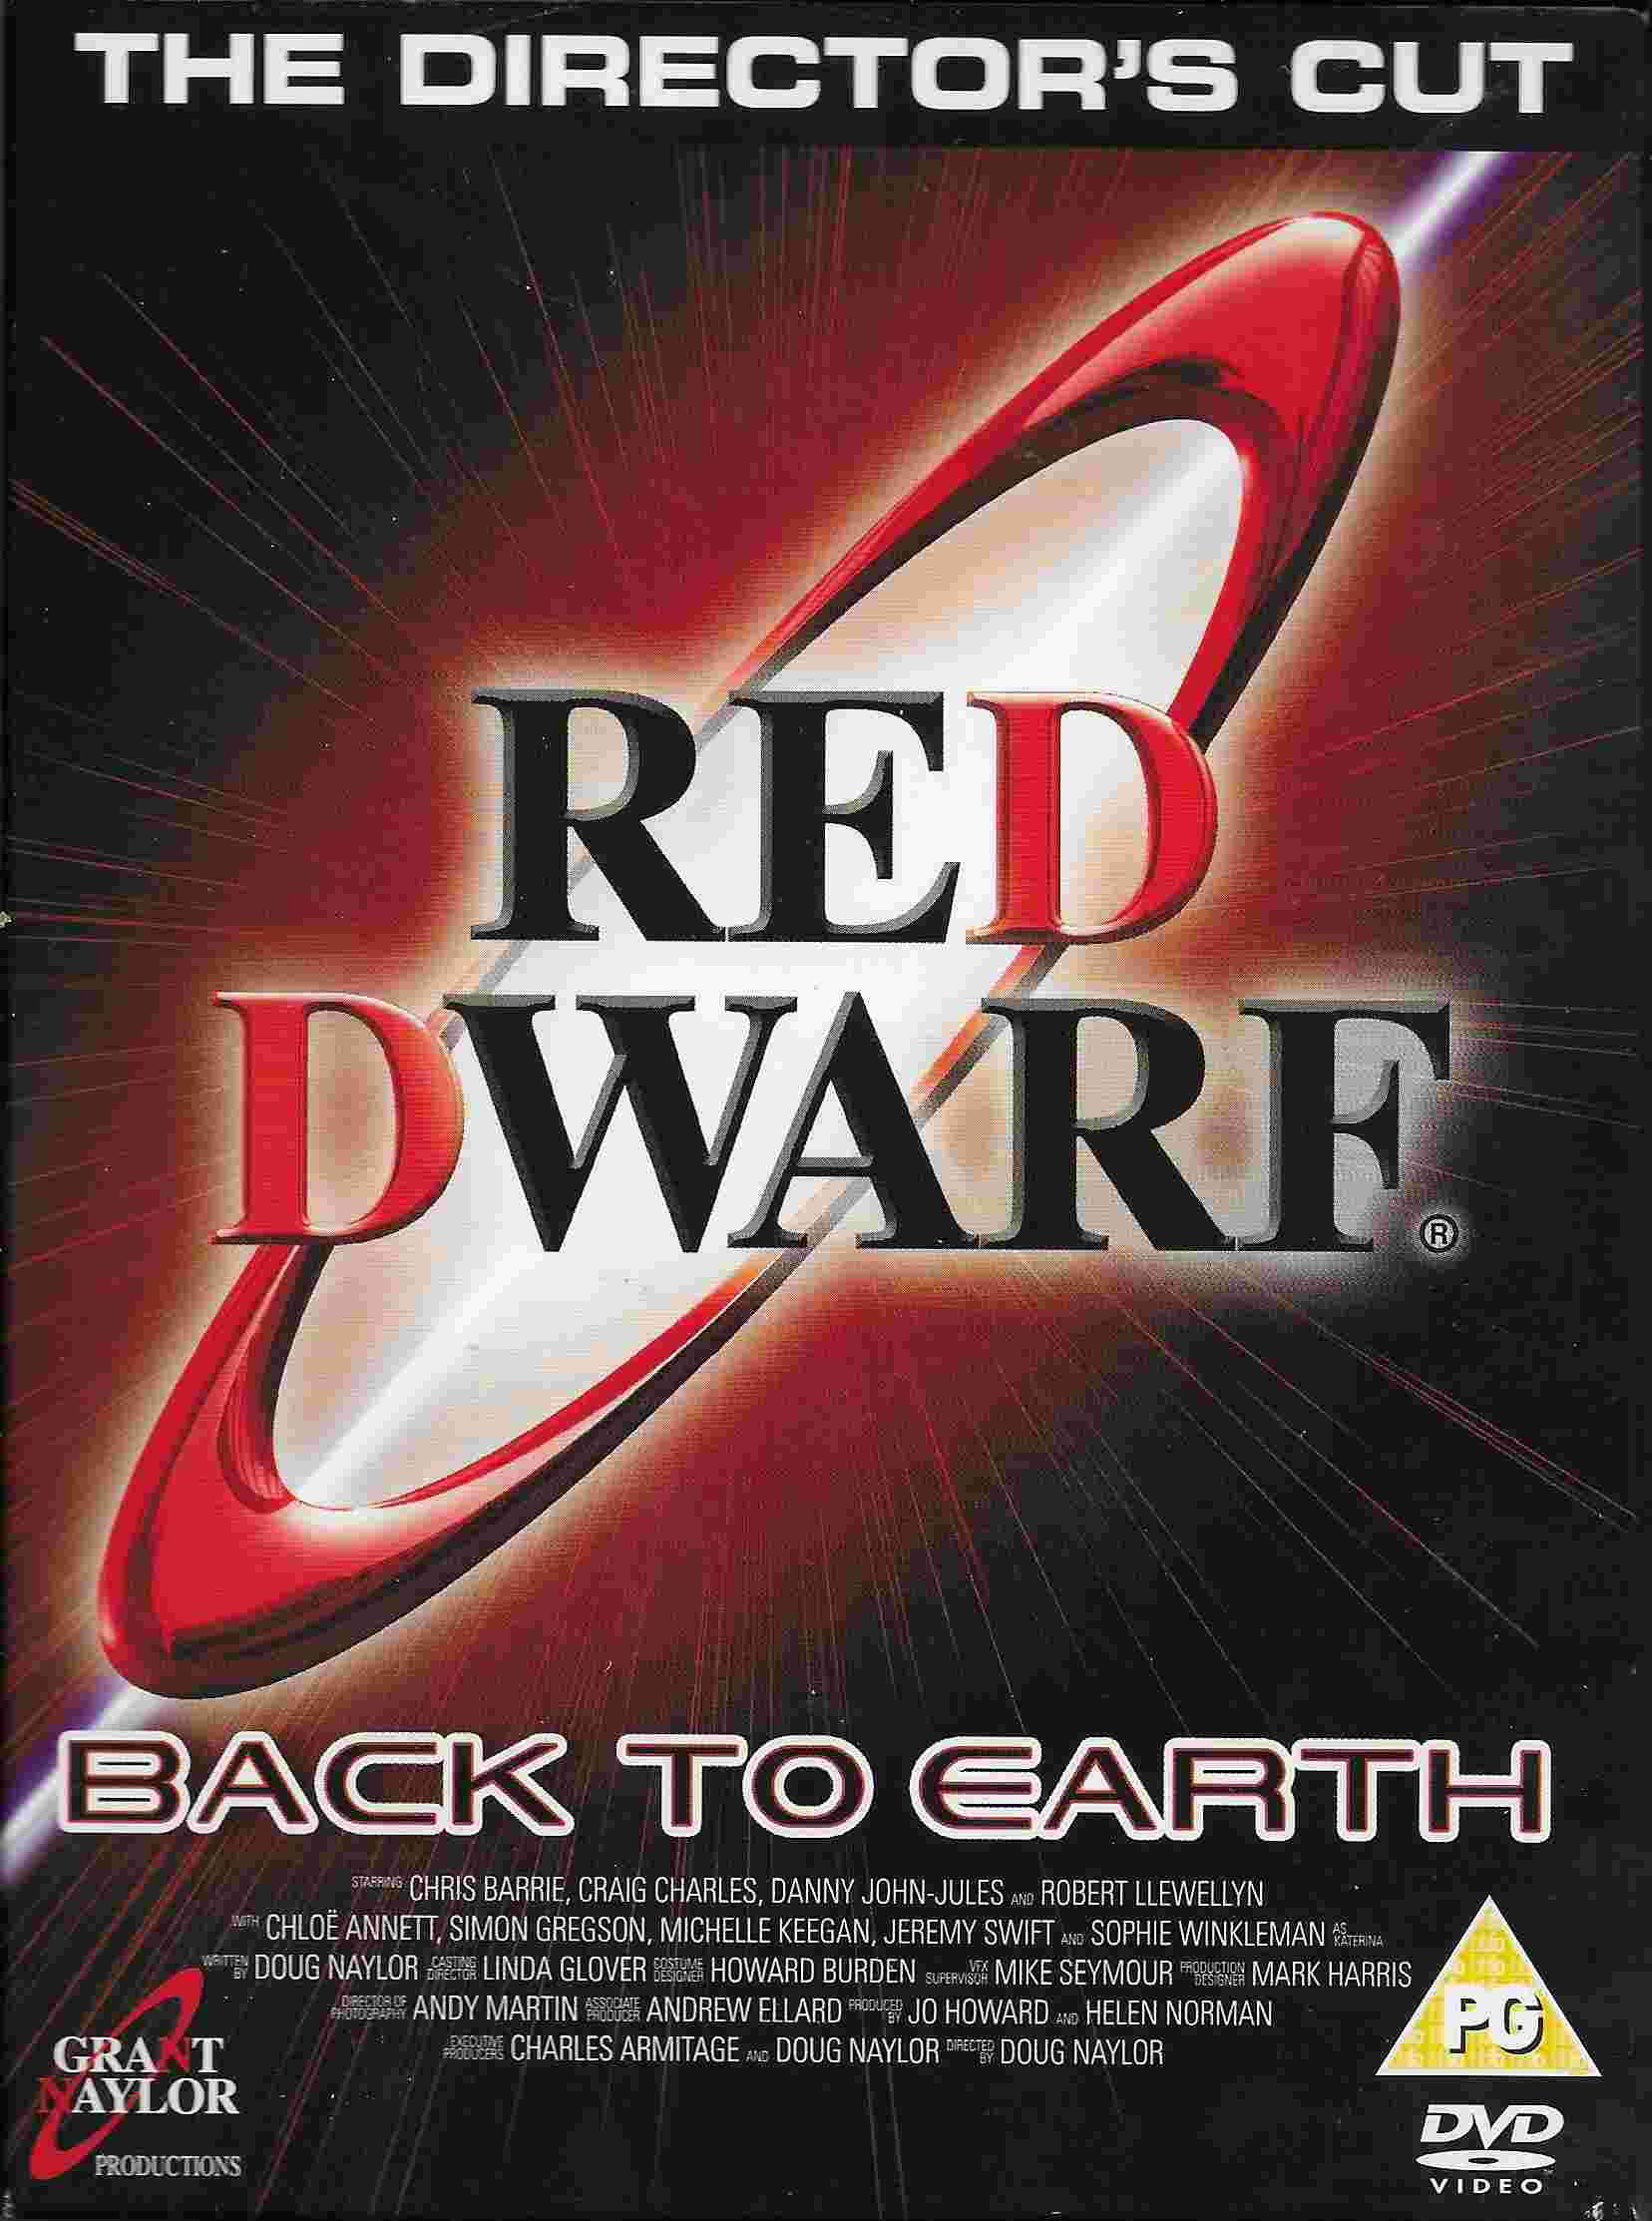 Picture of 2EDVD 0441 Red dwarf IX - Back to Earth by artist Doug Naylor from the BBC records and Tapes library